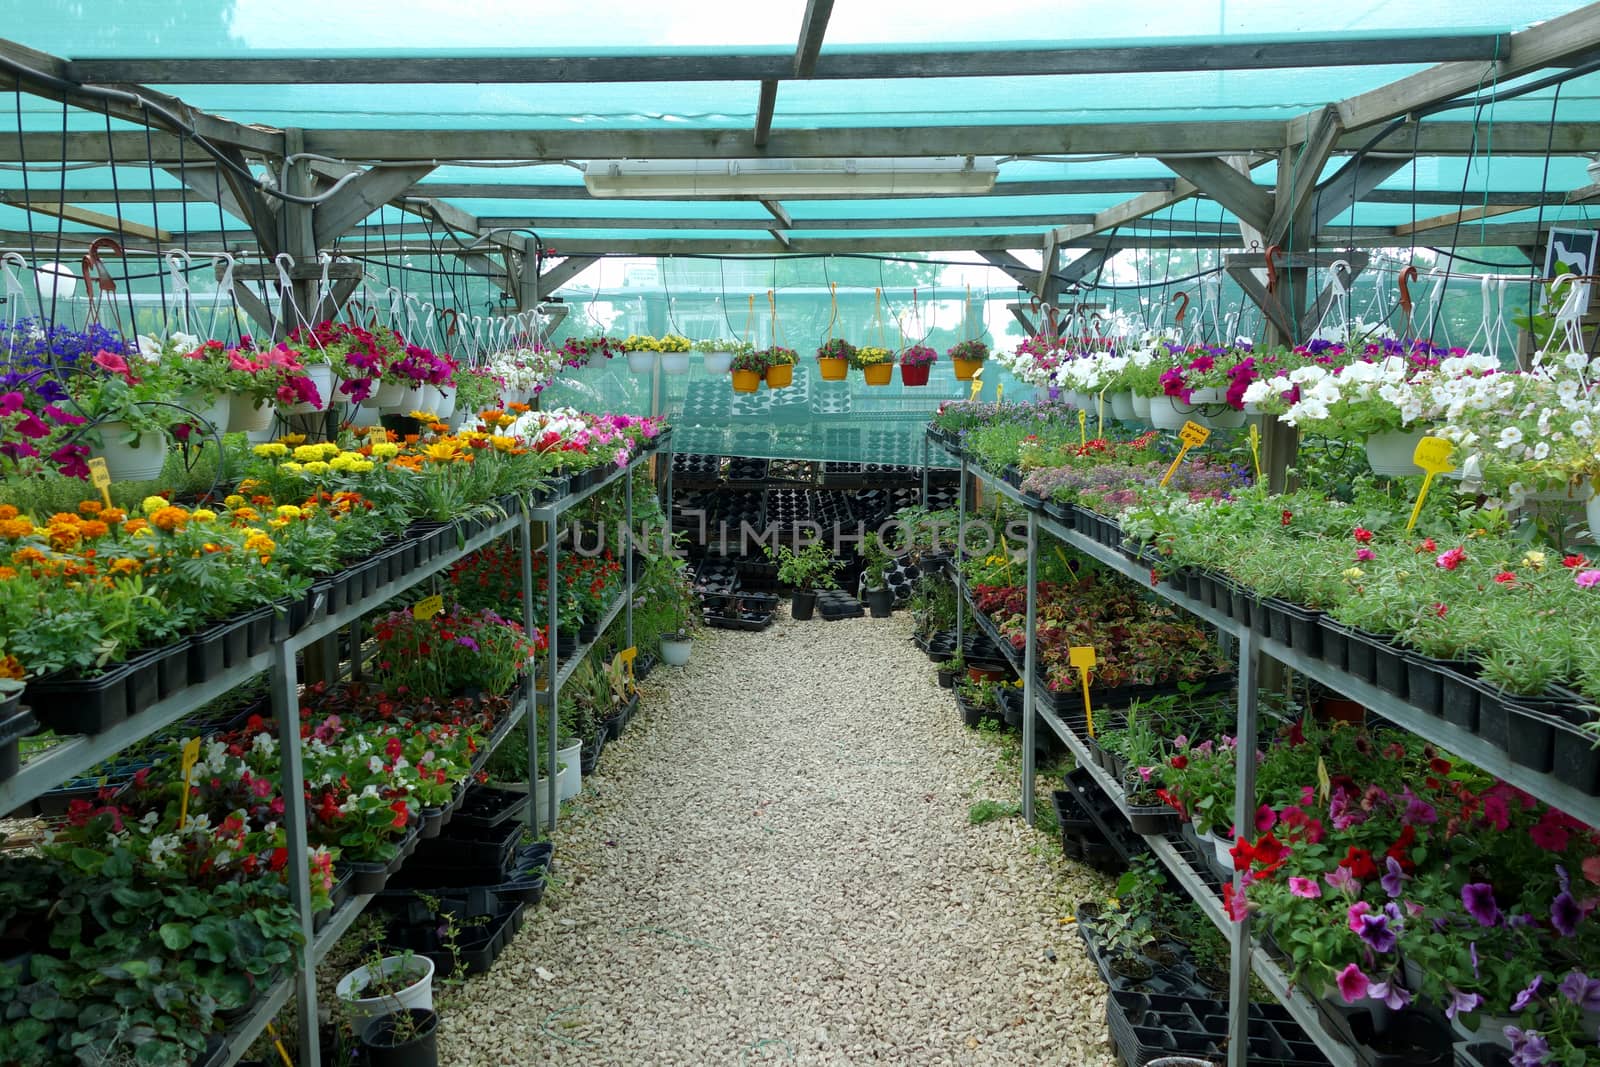 Plants and flowers for sale at the plant nursery.